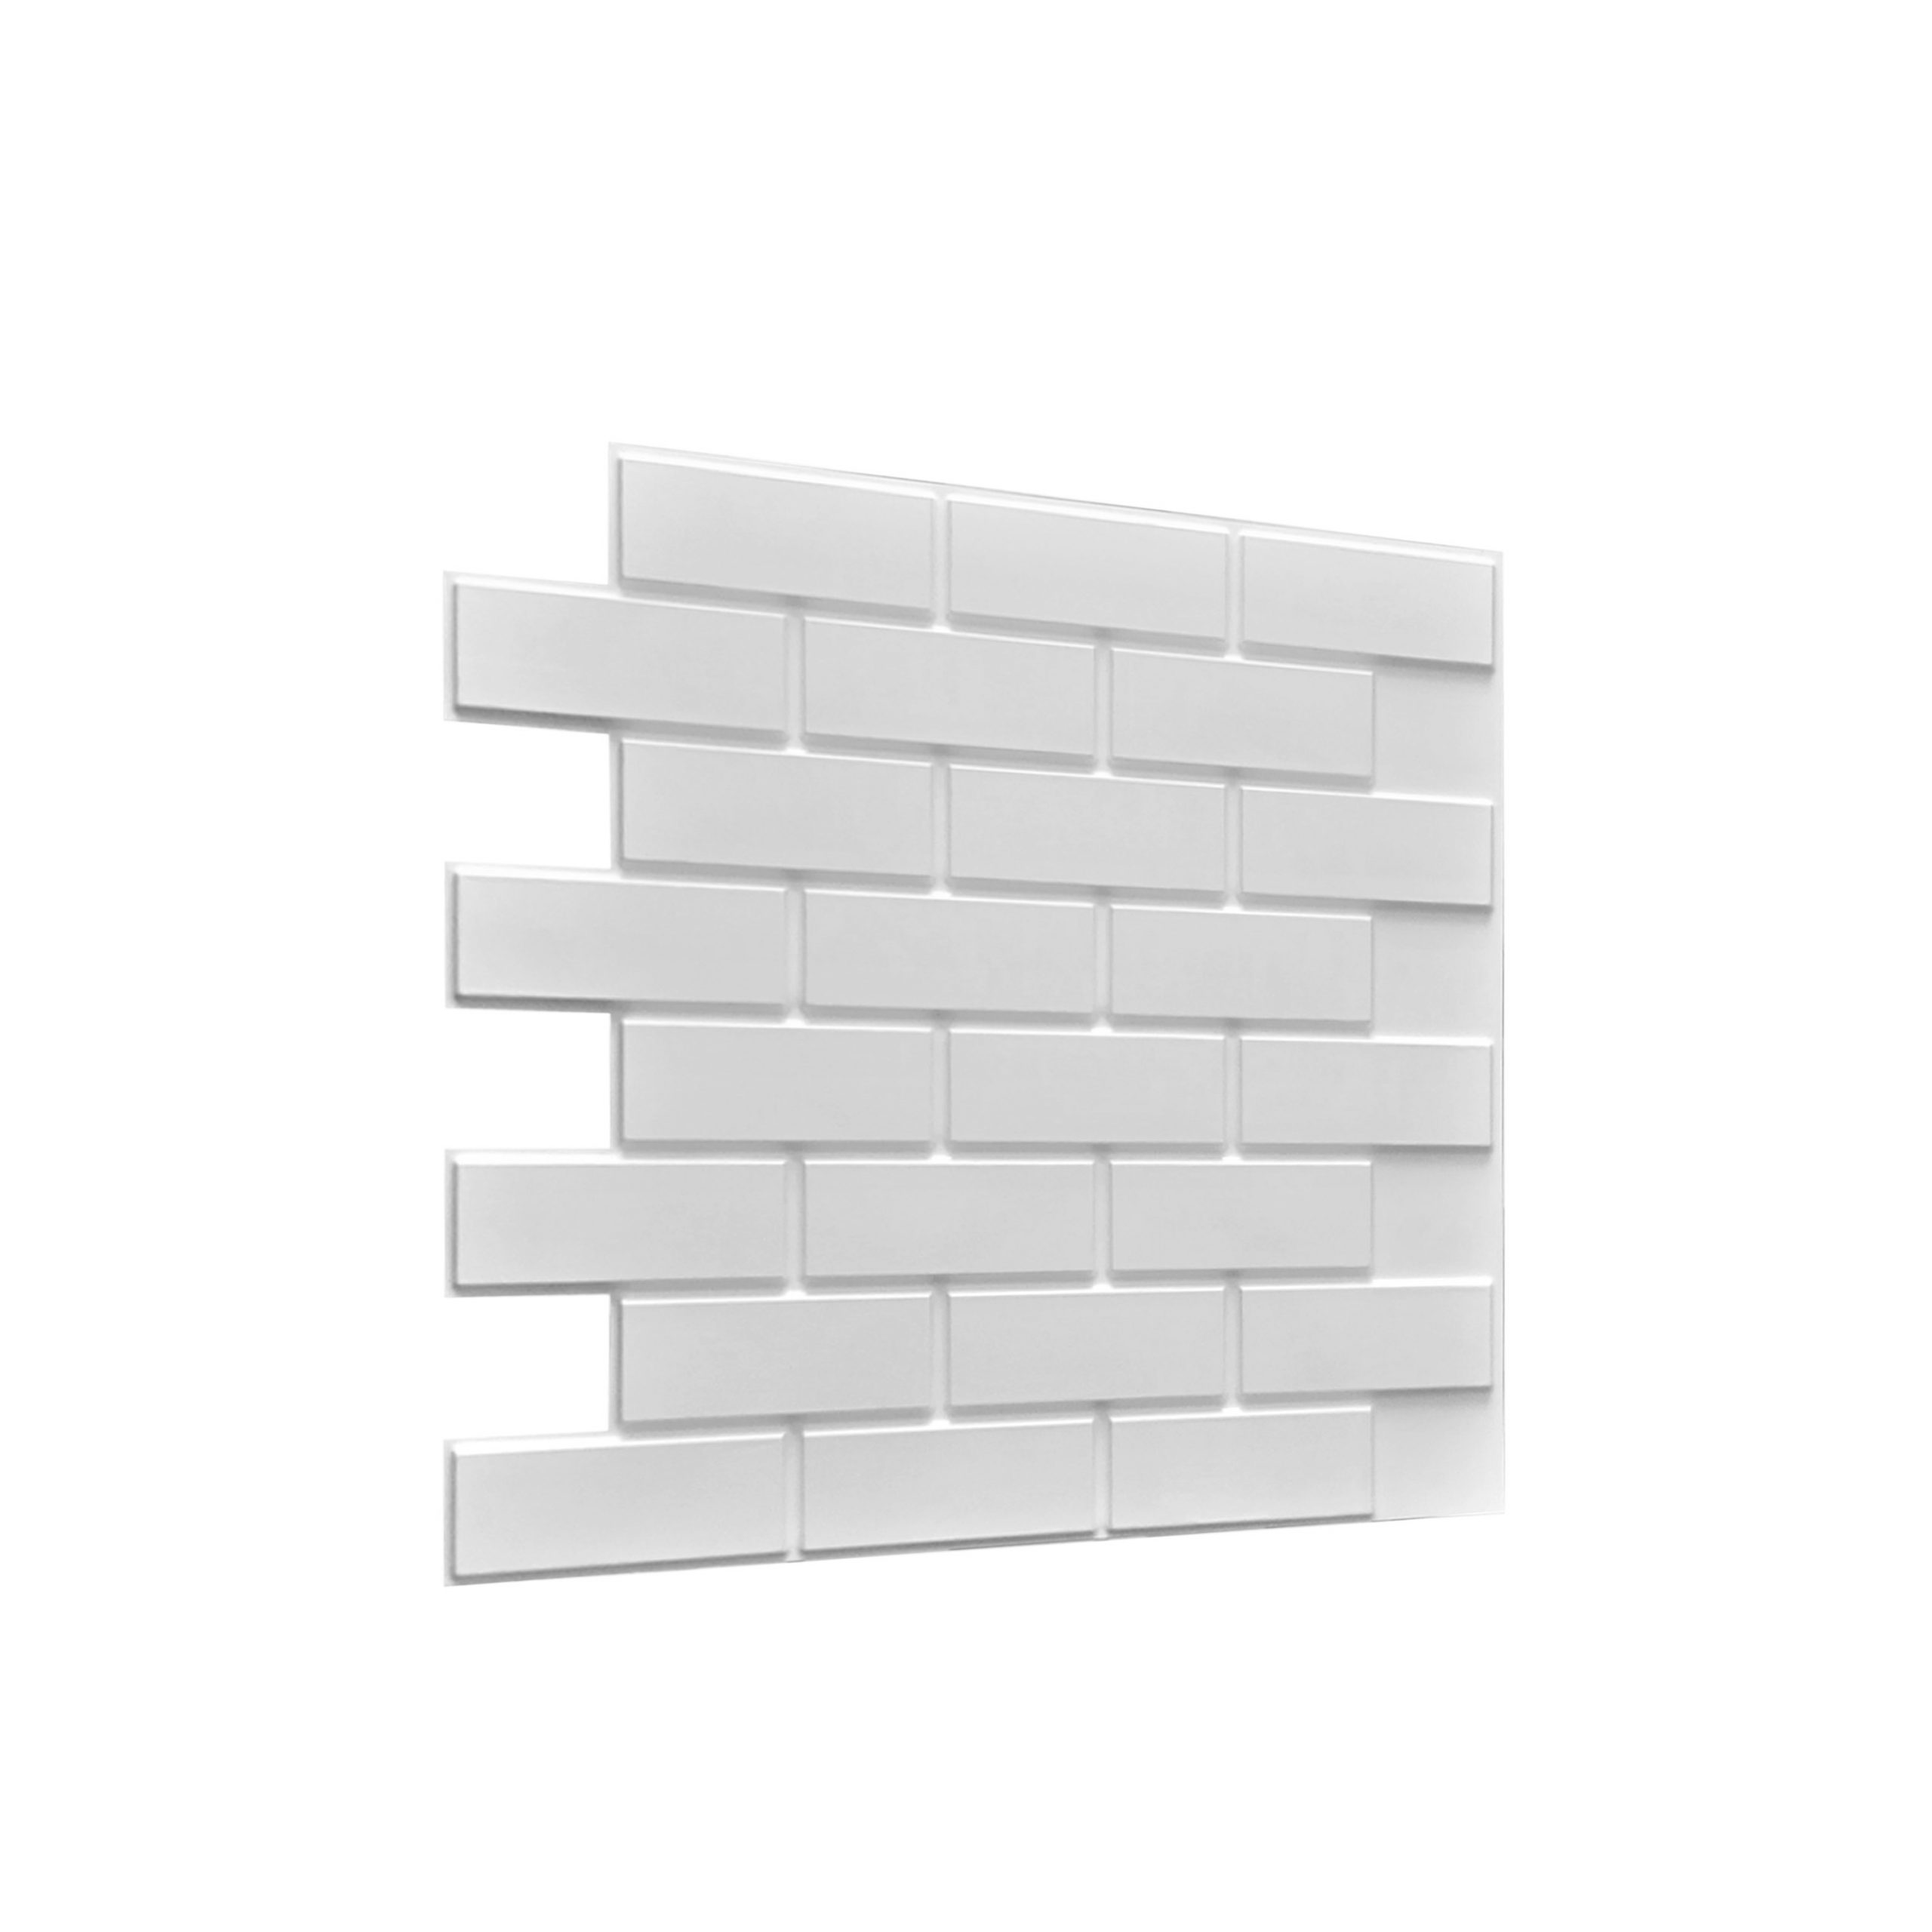 White Seamless Wall Panel. 3D Illustration of Glossy Relief and